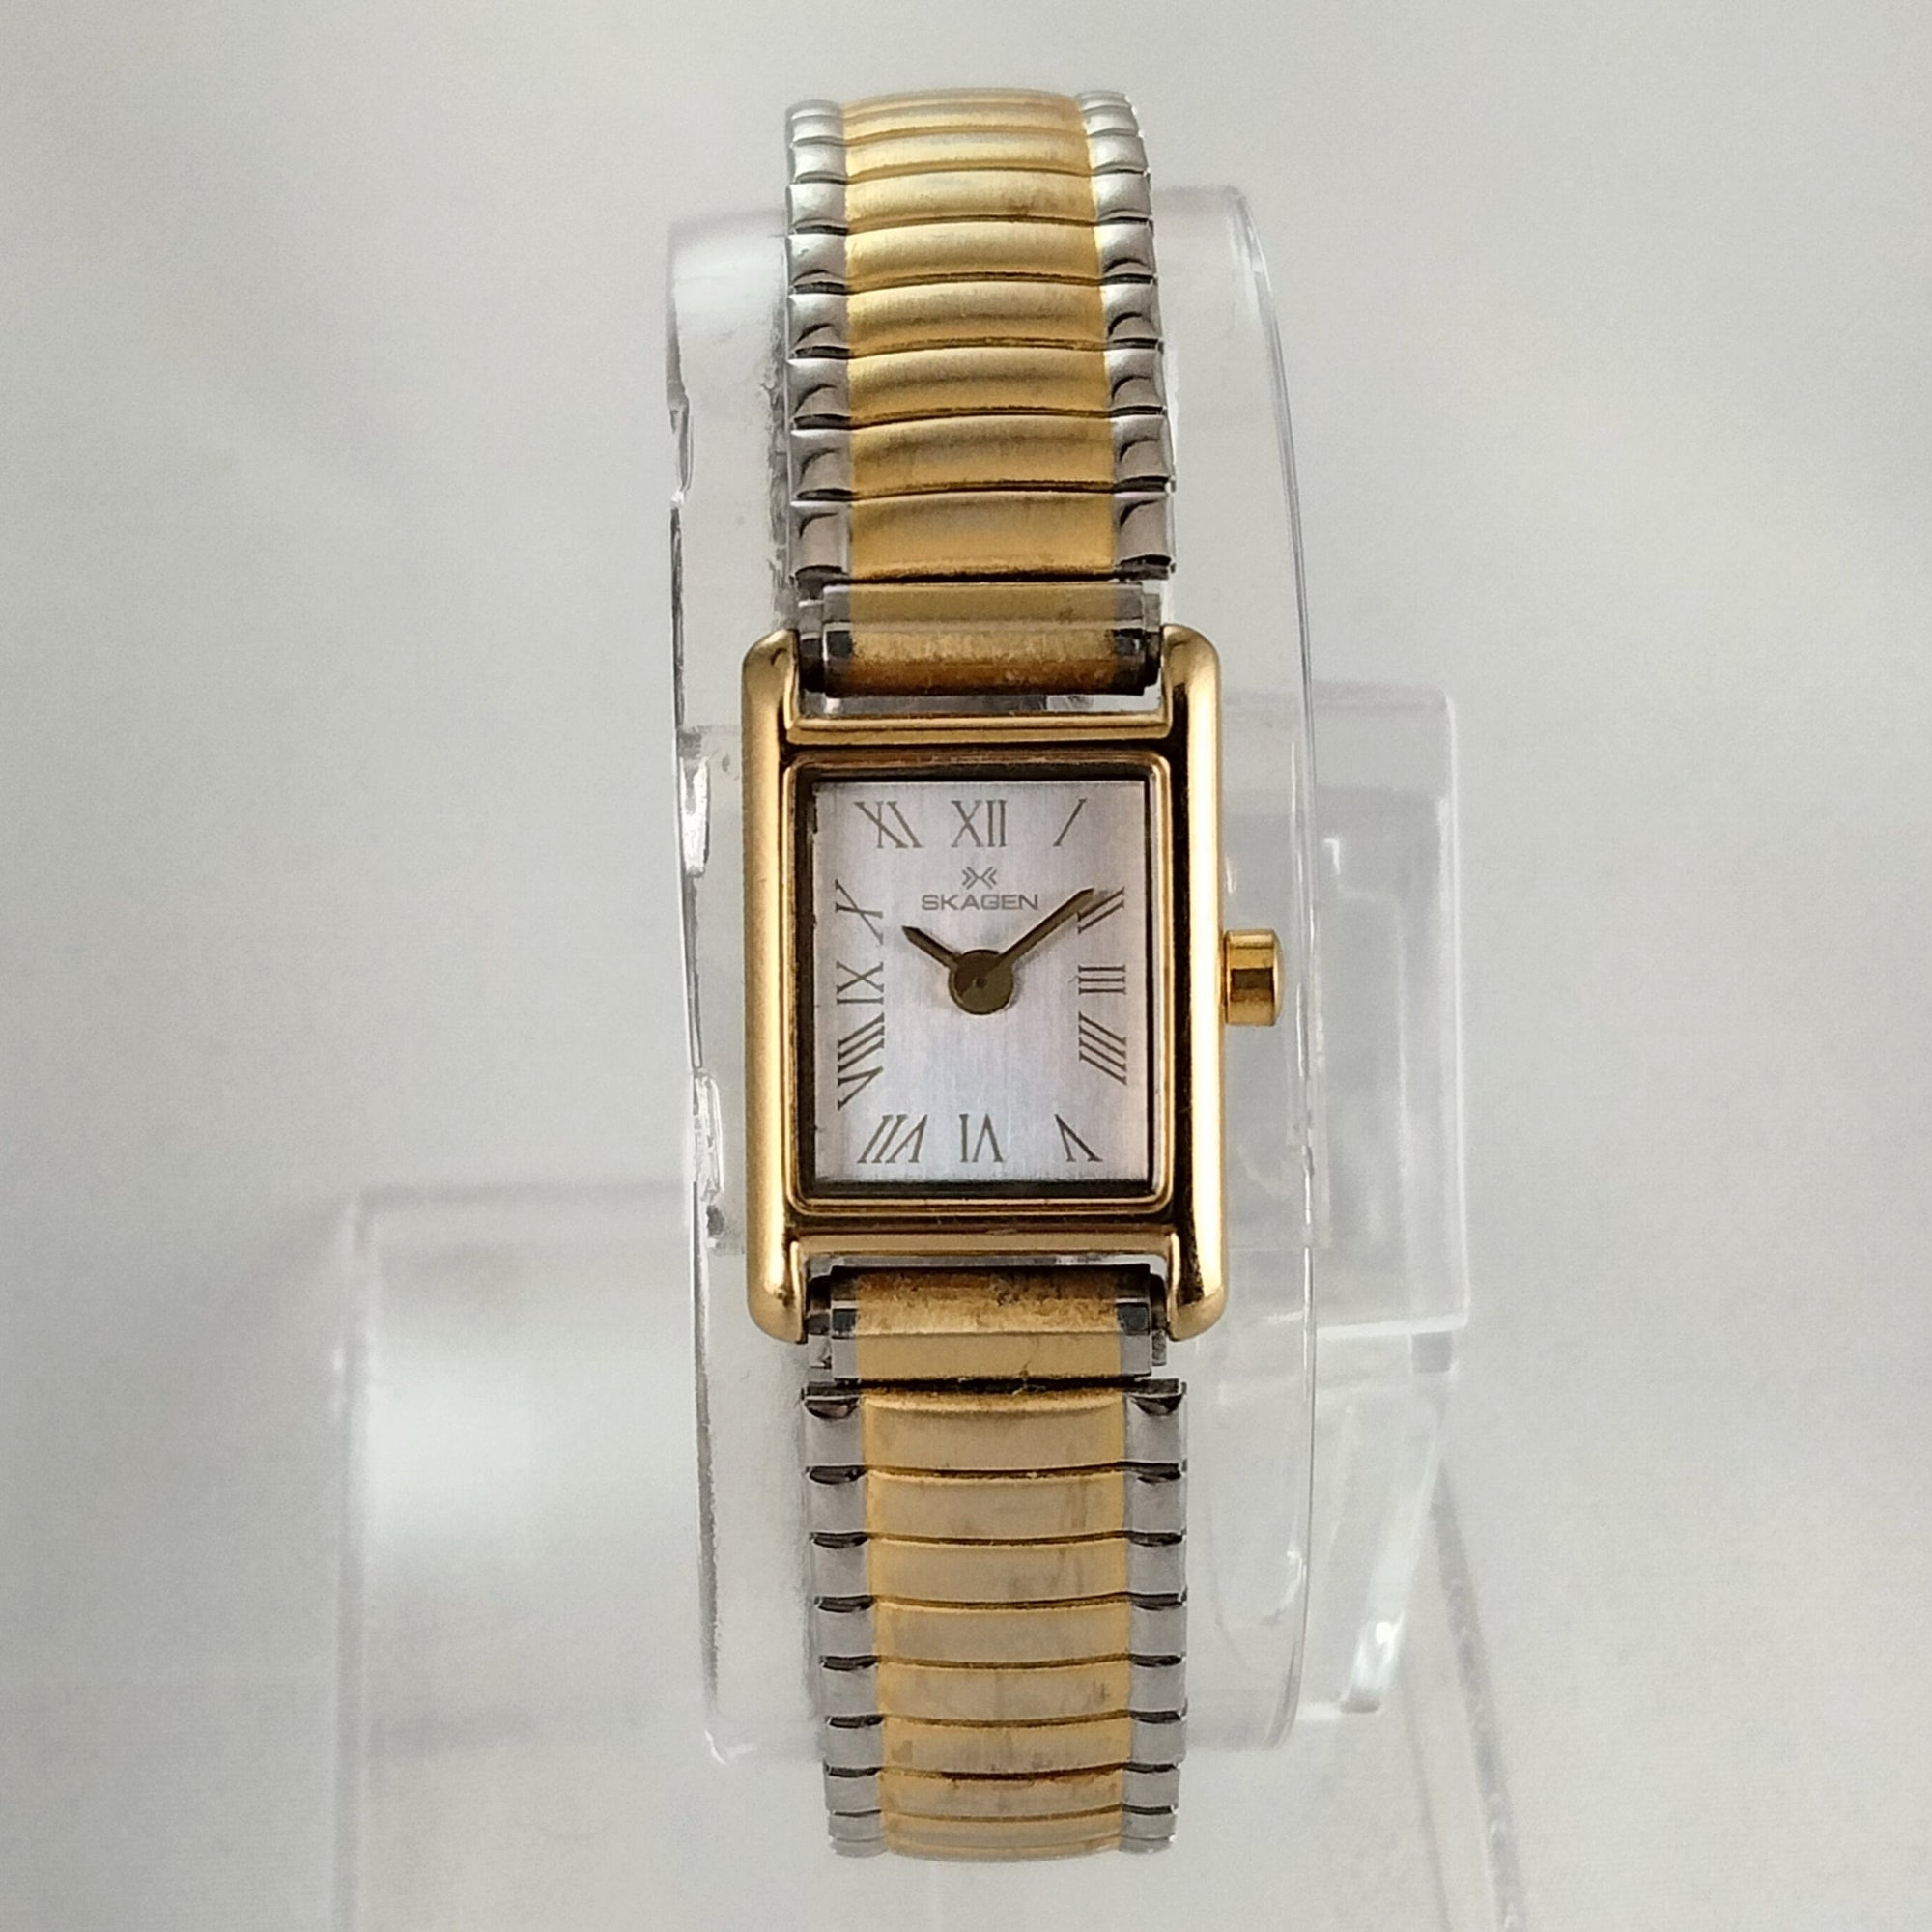 I Like Mikes Mid Century Modern Watches Skagen Women's Stainless Steel Watch with Roman Numeral Hour Markers, Gold Tone Details, Stretch Expansion Strap